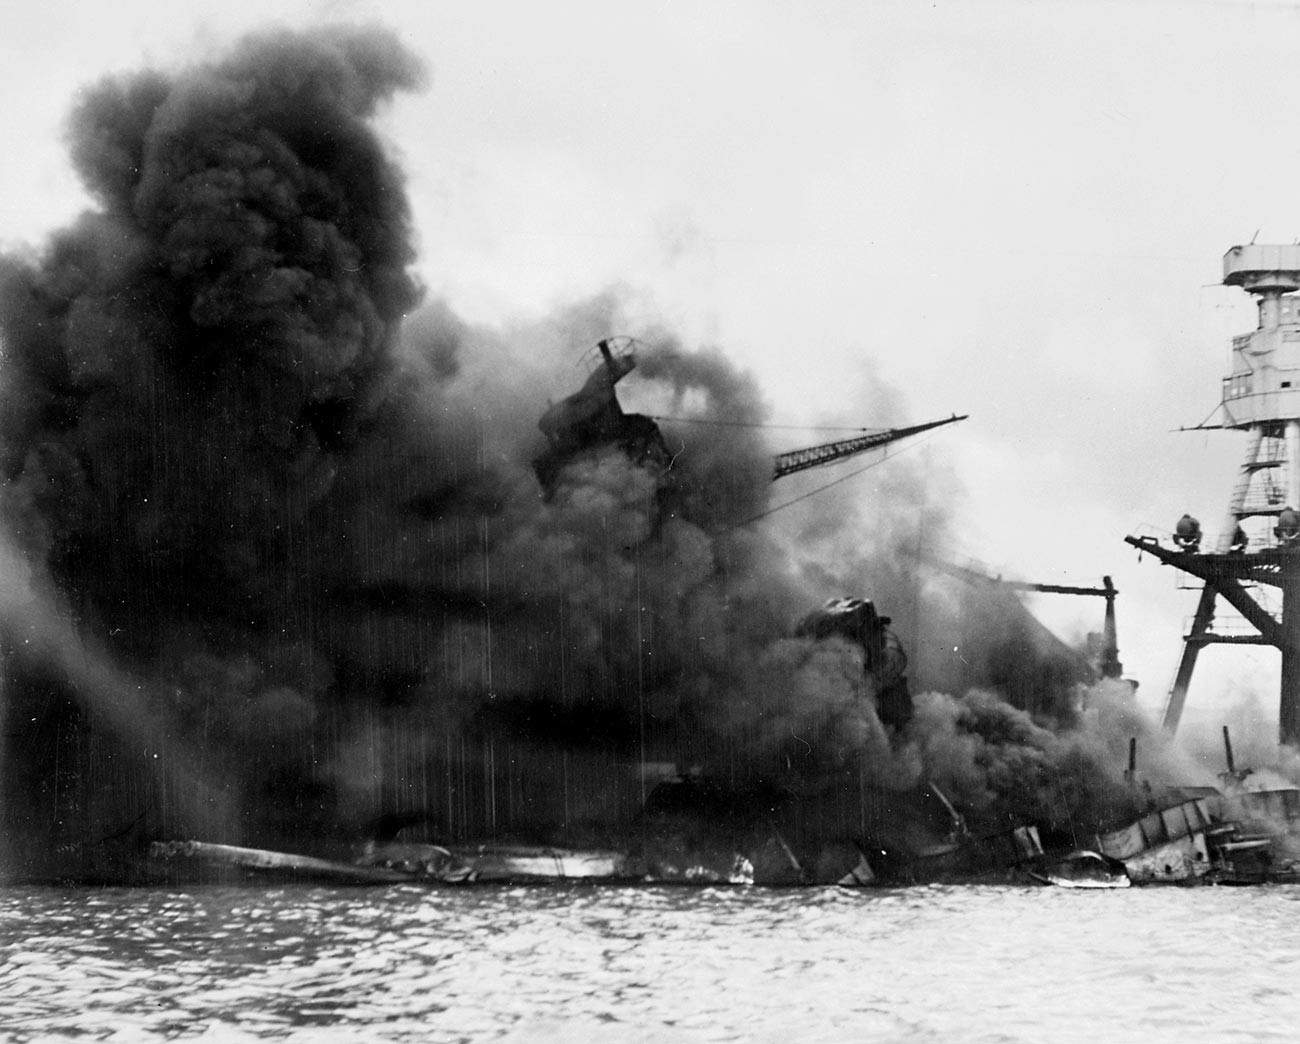 The USS Arizona sinking in a cloud of smoke after the Japanese attack on Pearl Harbor during World War II.